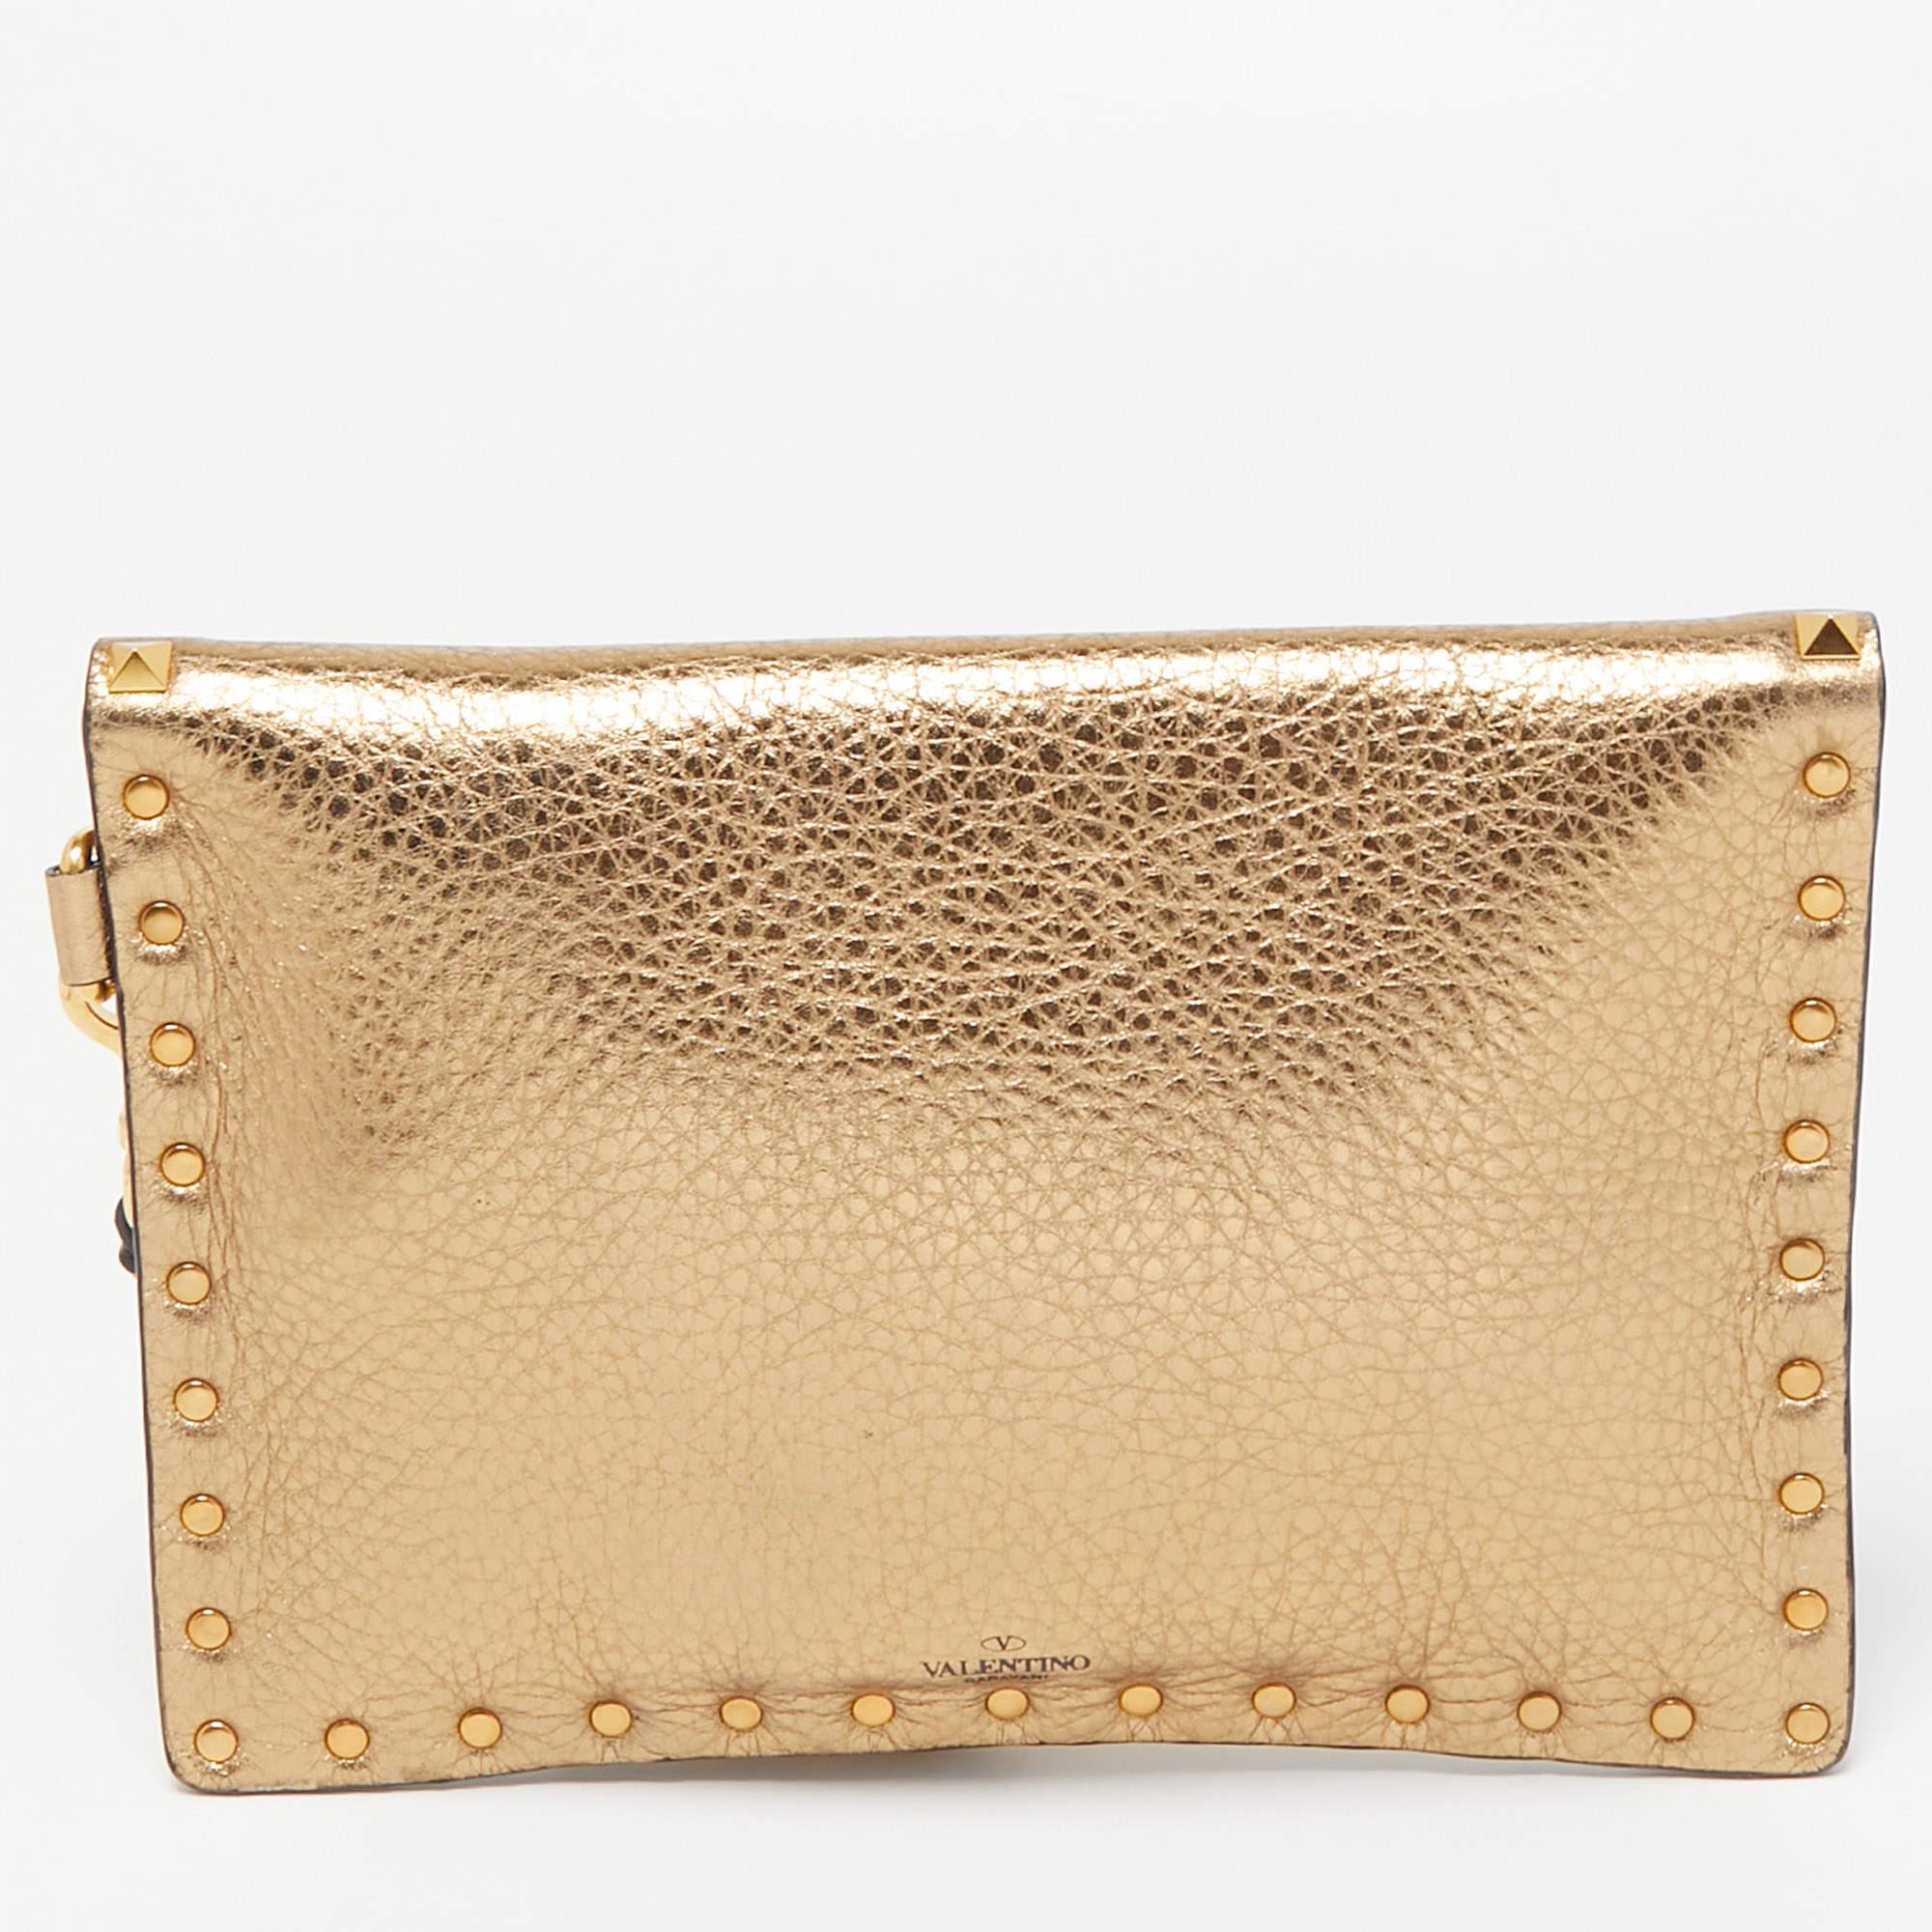 This clutch is just the right accessory to compliment your chic ensemble. It comes crafted in quality material featuring a well-sized interior that can comfortably hold all your little essentials.

Includes: Original Dustbag

